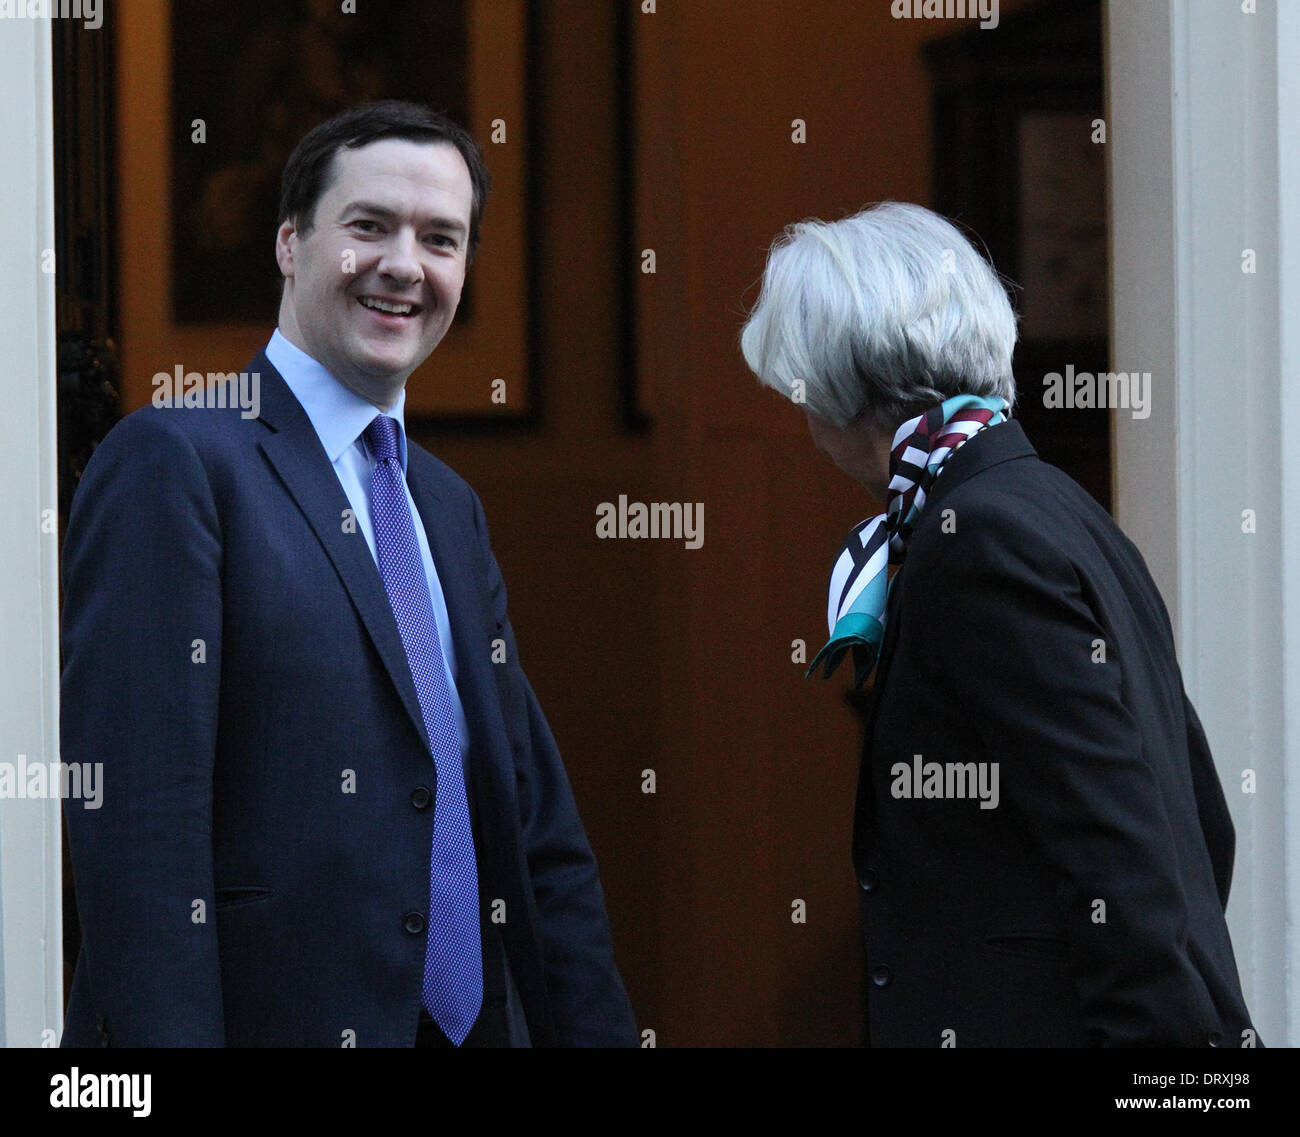 London, UK, 4th February 2014. Chancellor George Osborne meets the Head of the IMF, Christine Lagarde seen at Downing Street, We Stock Photo